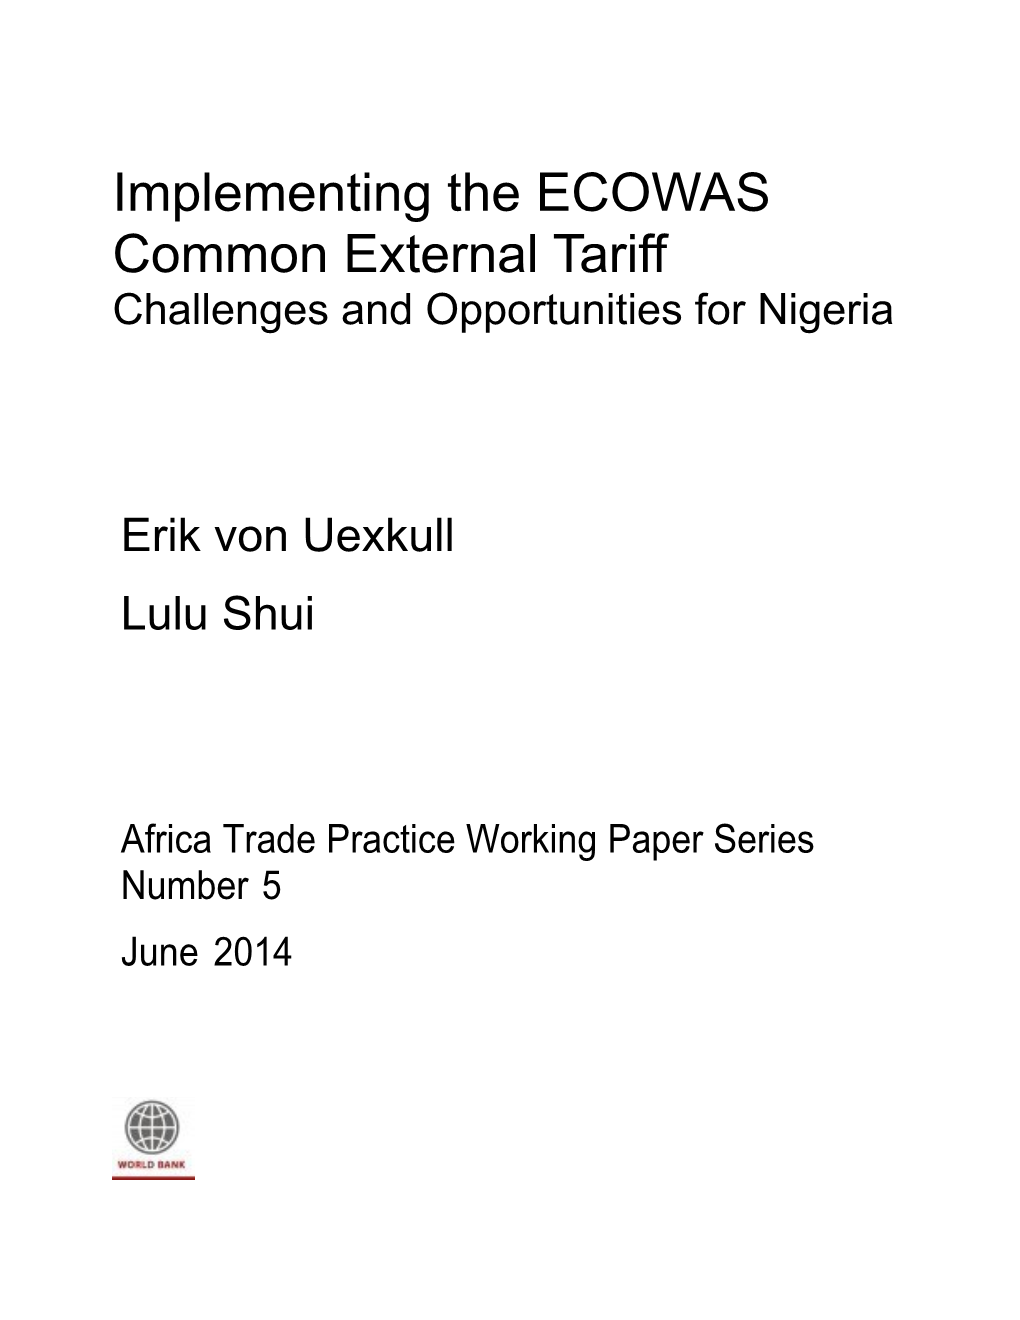 Implementing the ECOWAS Common External Tariff